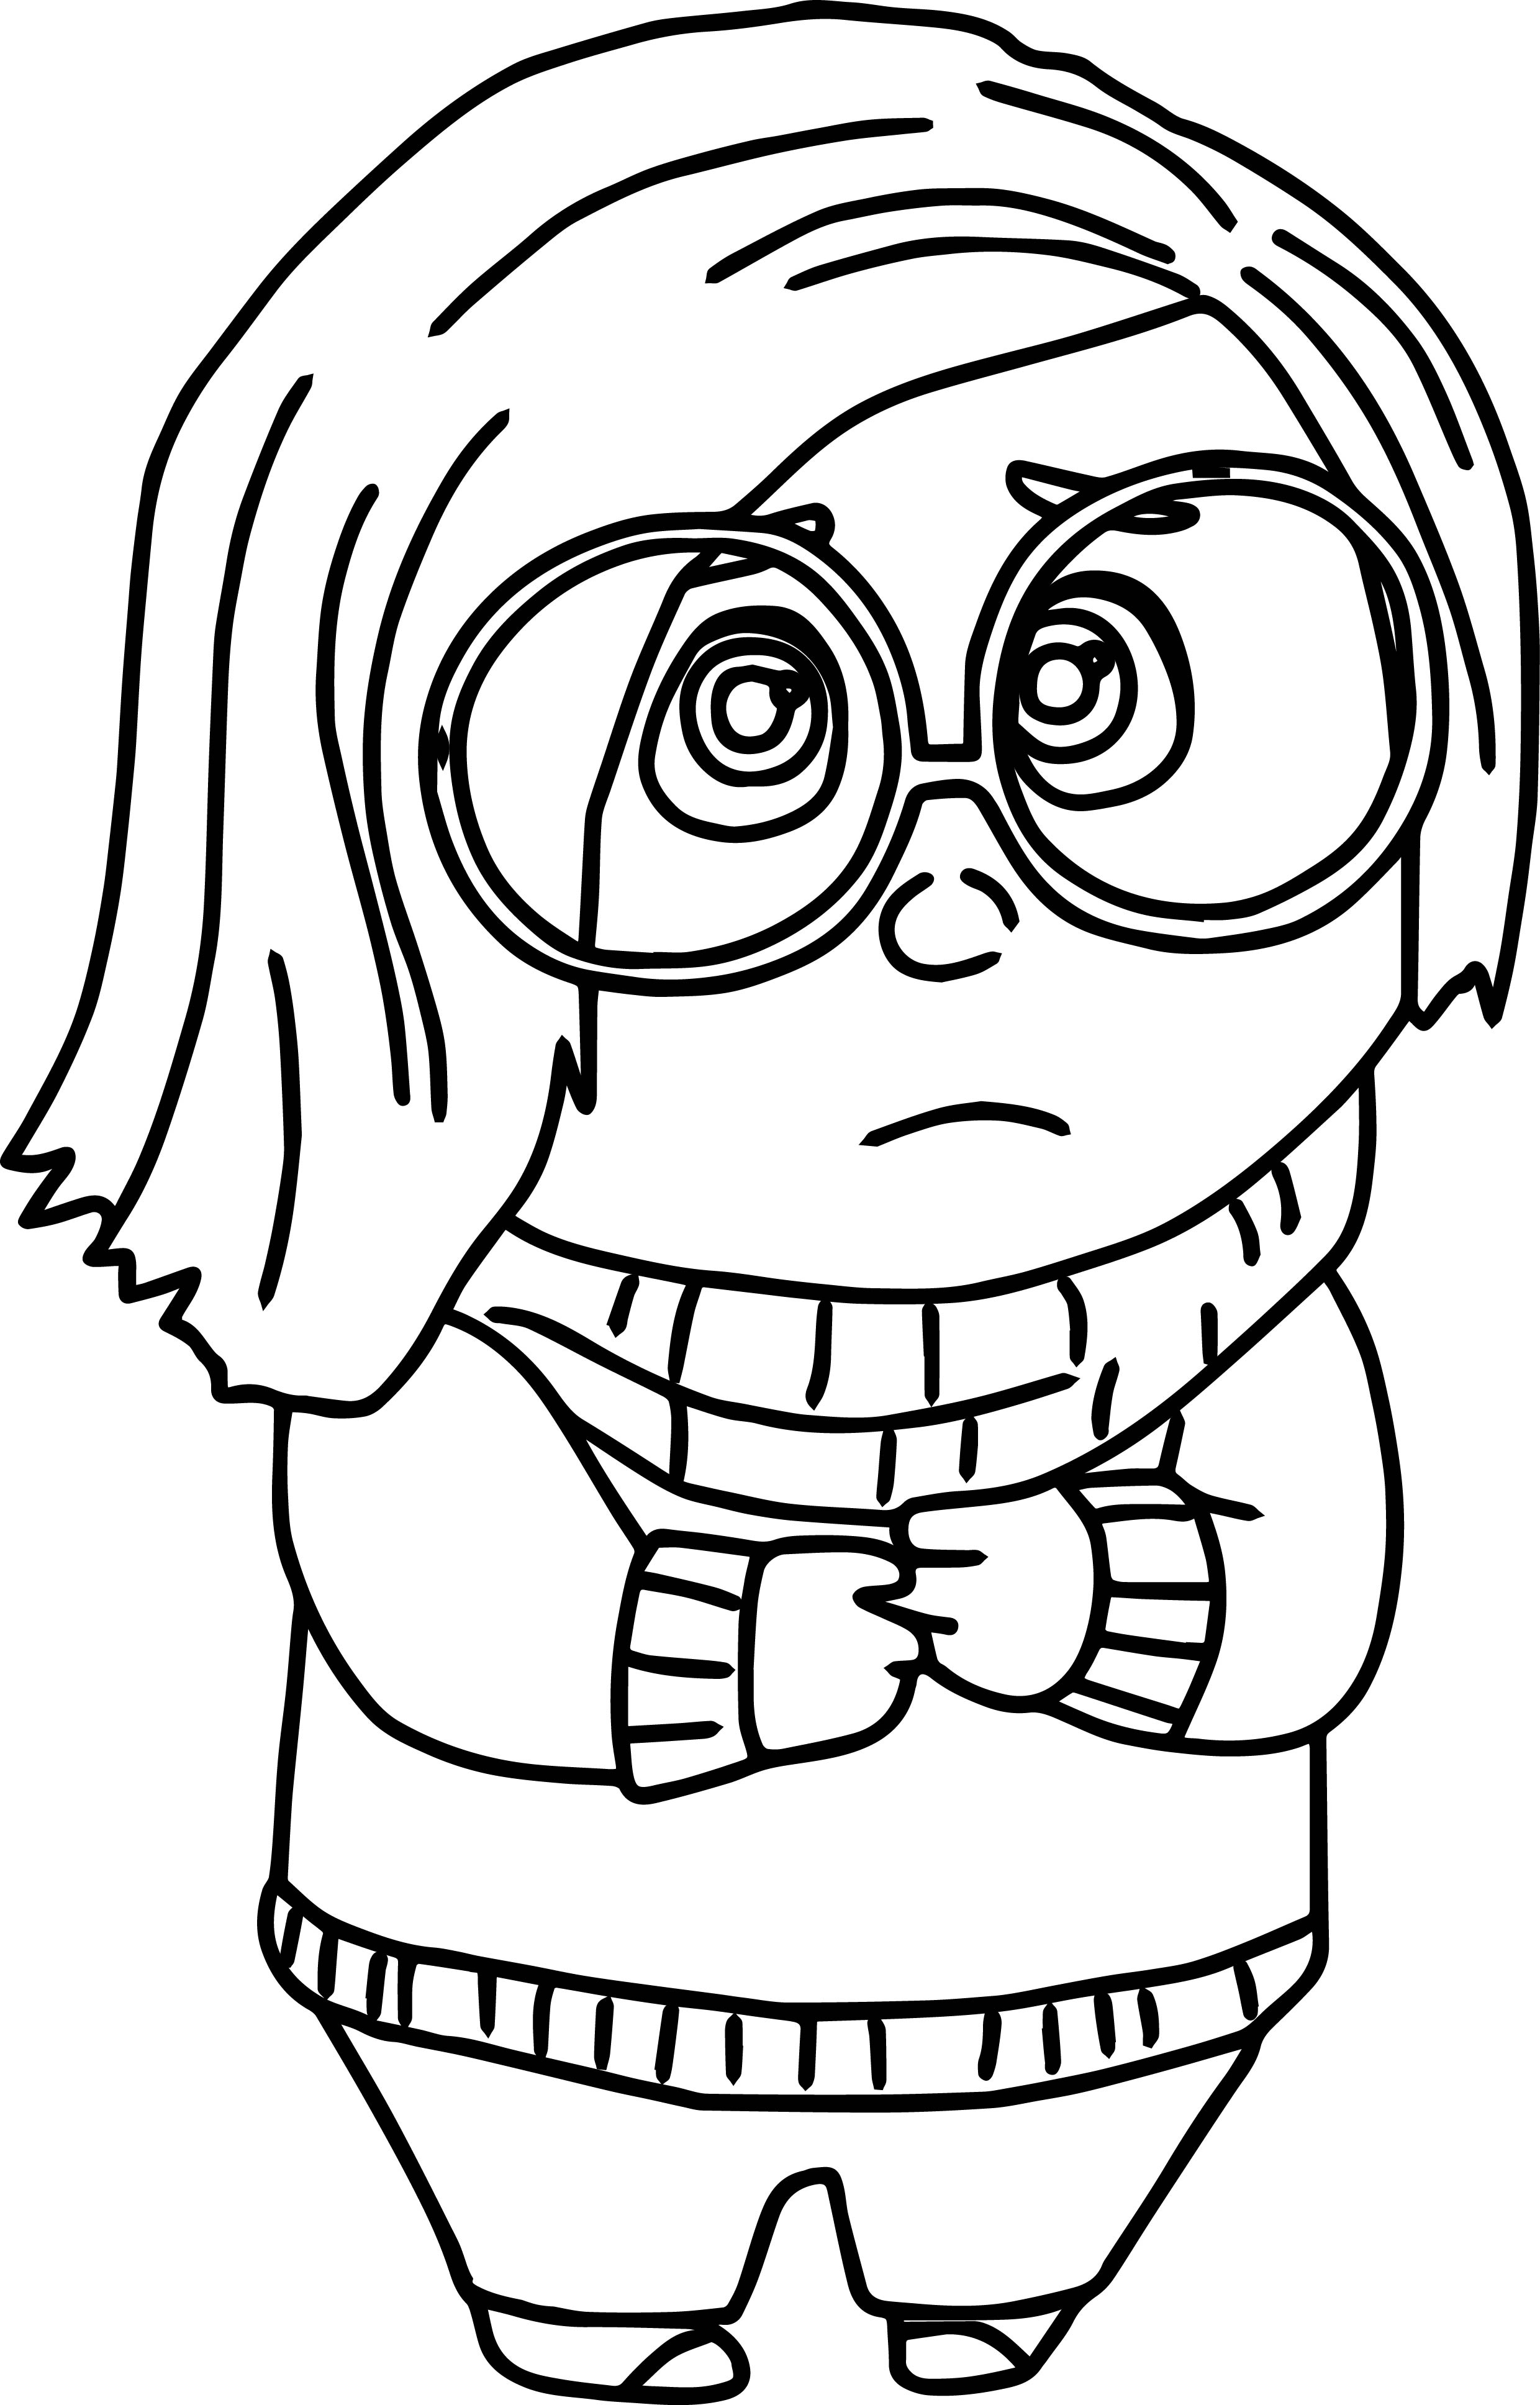 Inside Out Sadness Coloring Page Insideout Sadness Coloring Pages Wecoloringpage